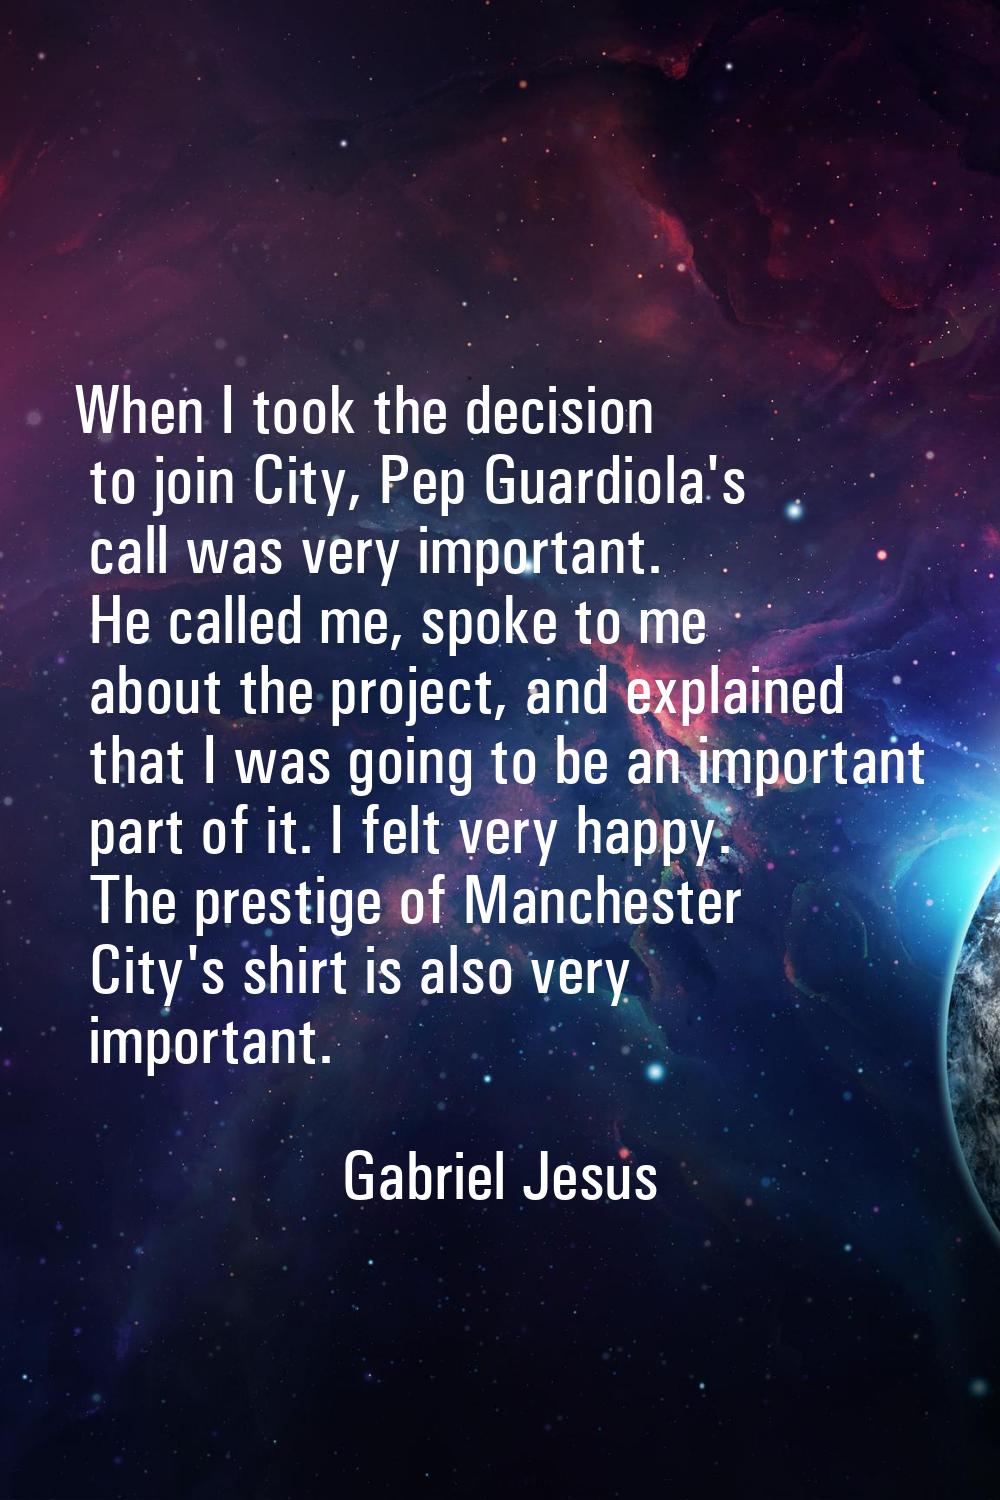 When I took the decision to join City, Pep Guardiola's call was very important. He called me, spoke